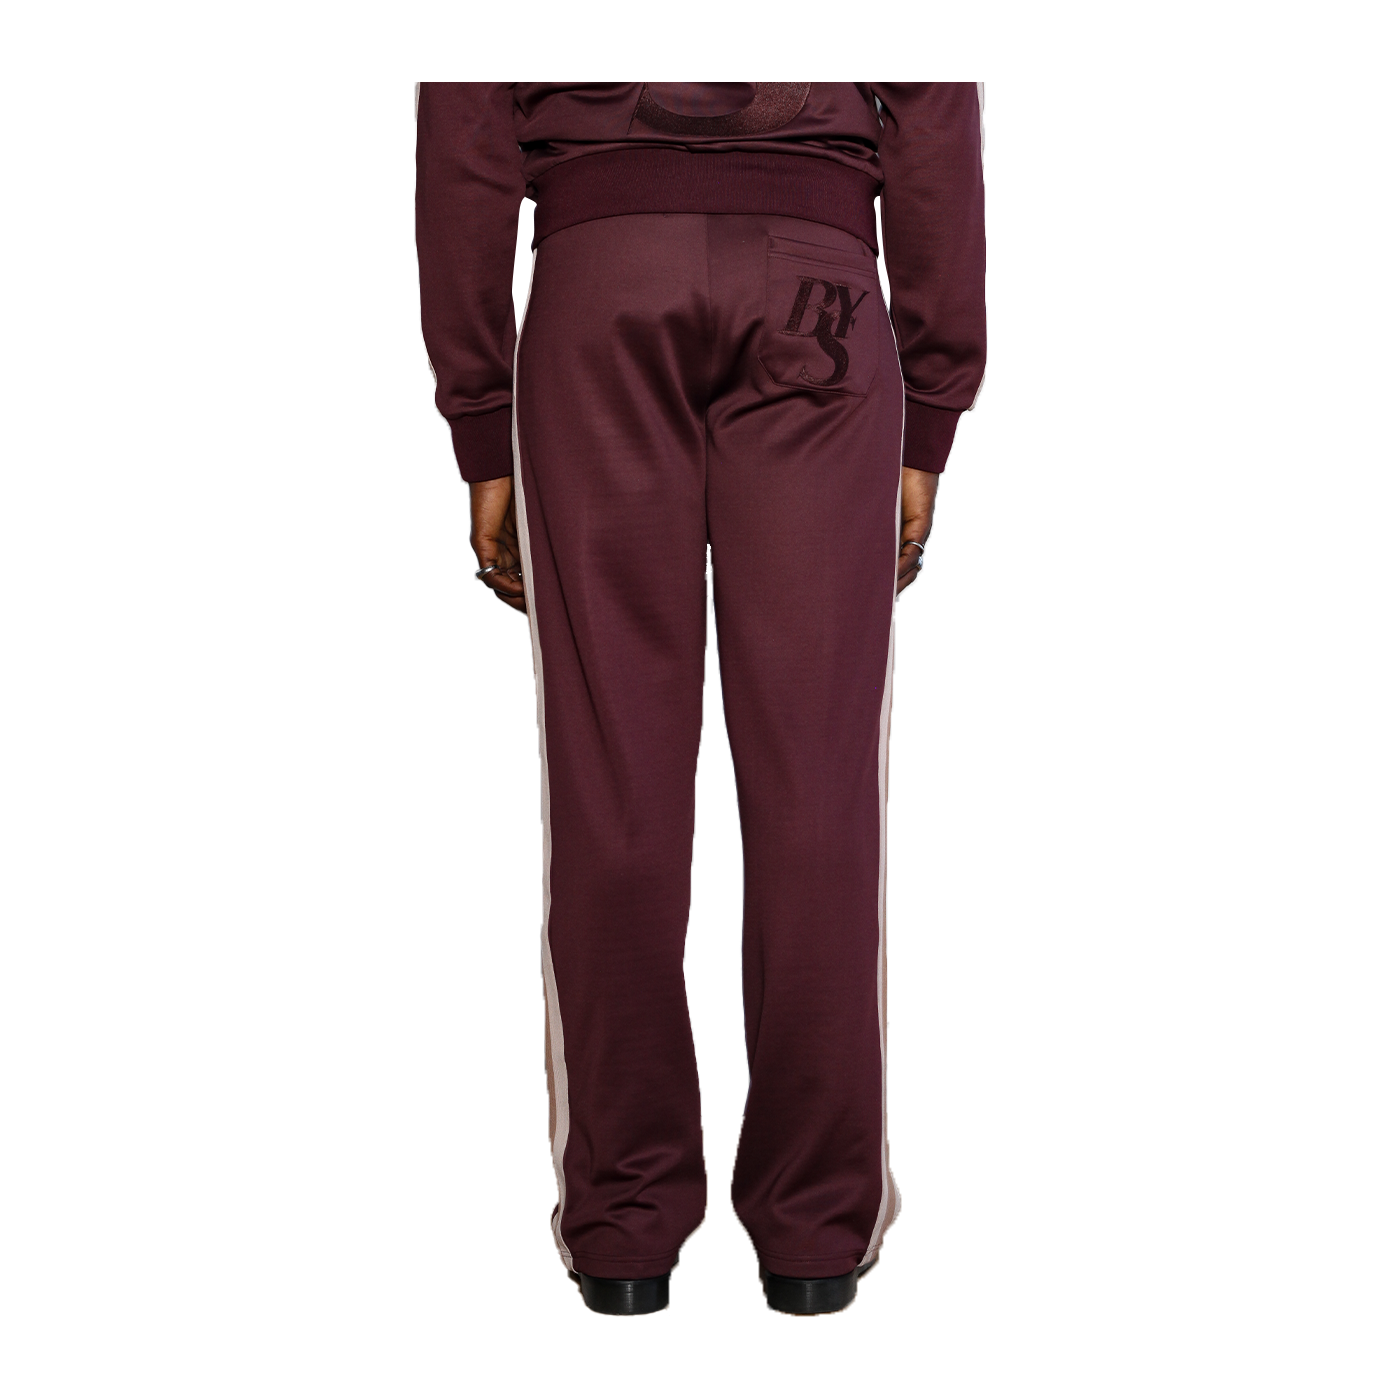 Uptown Track Pants - Bordeaux (Ships in 7-10 working days)